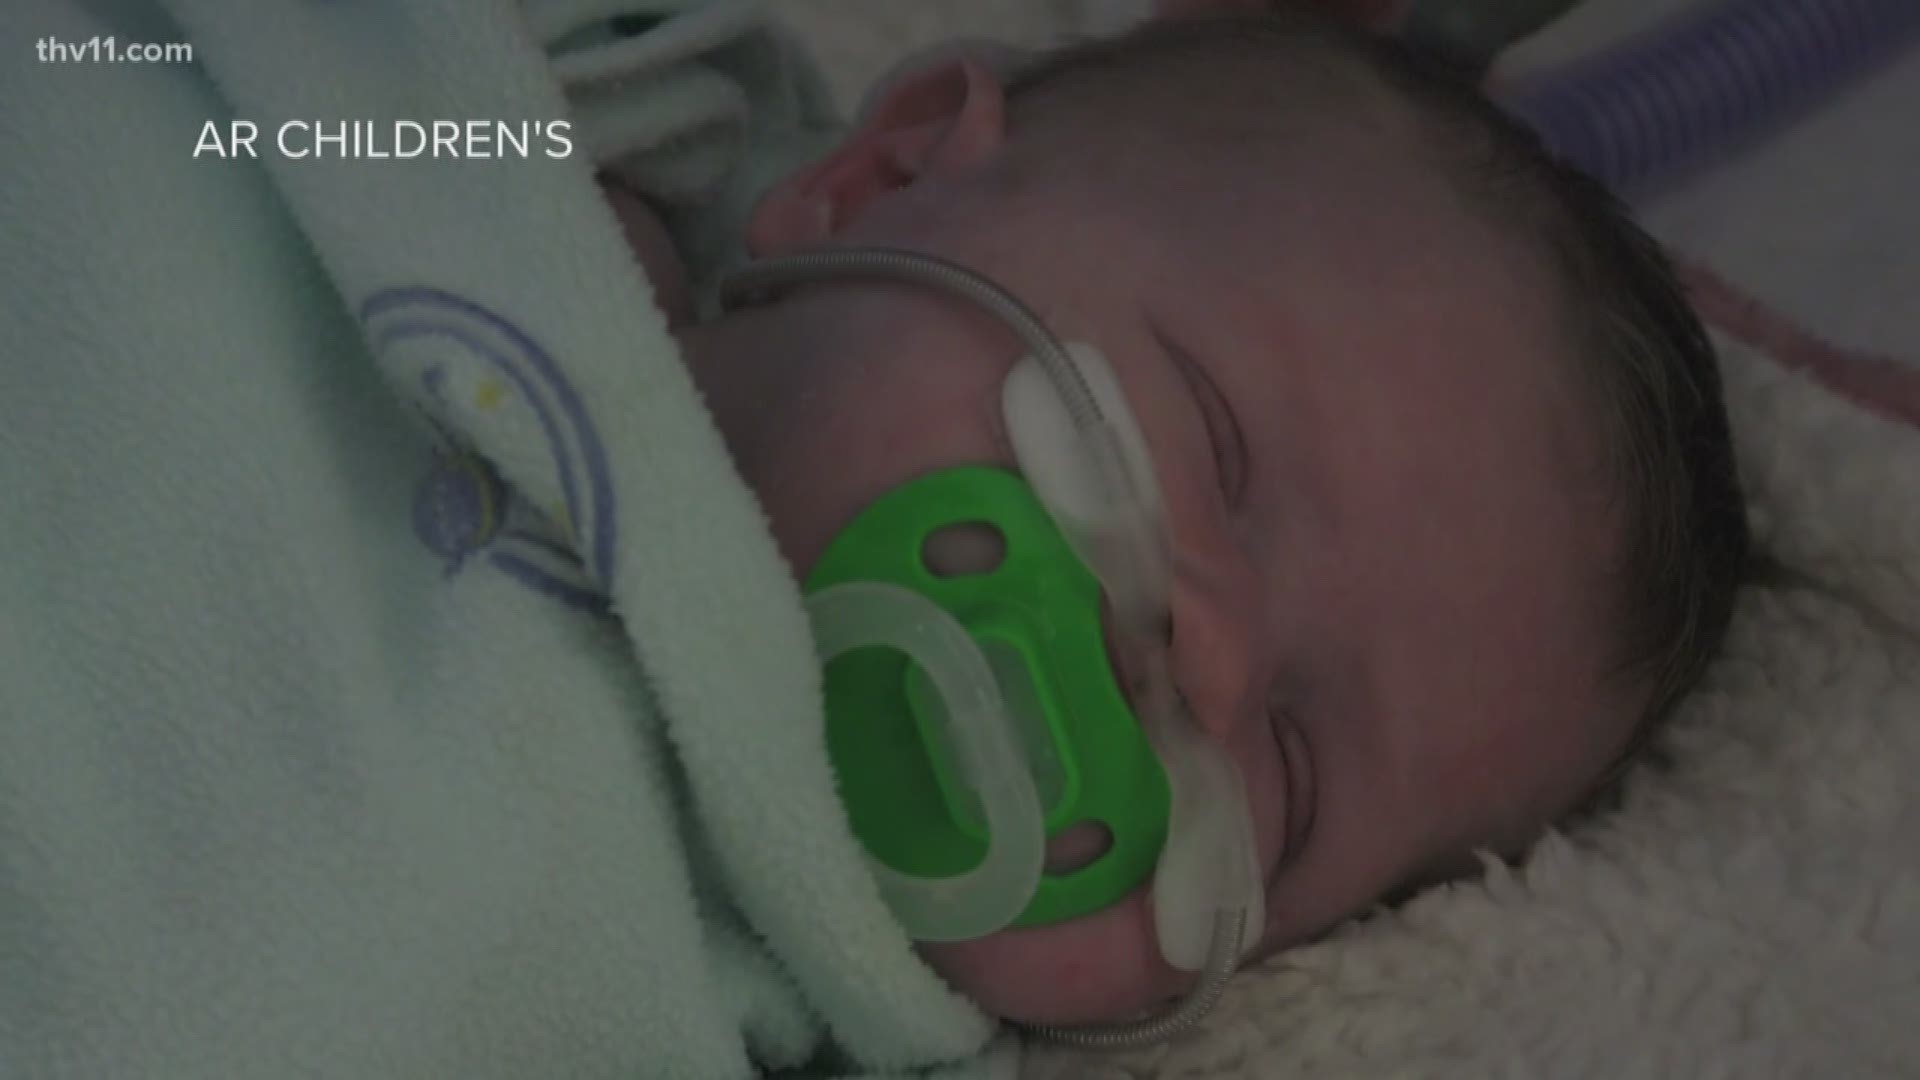 Arkansas Children's Hospital is seeing a major increase in the amount of RSV cases this year.